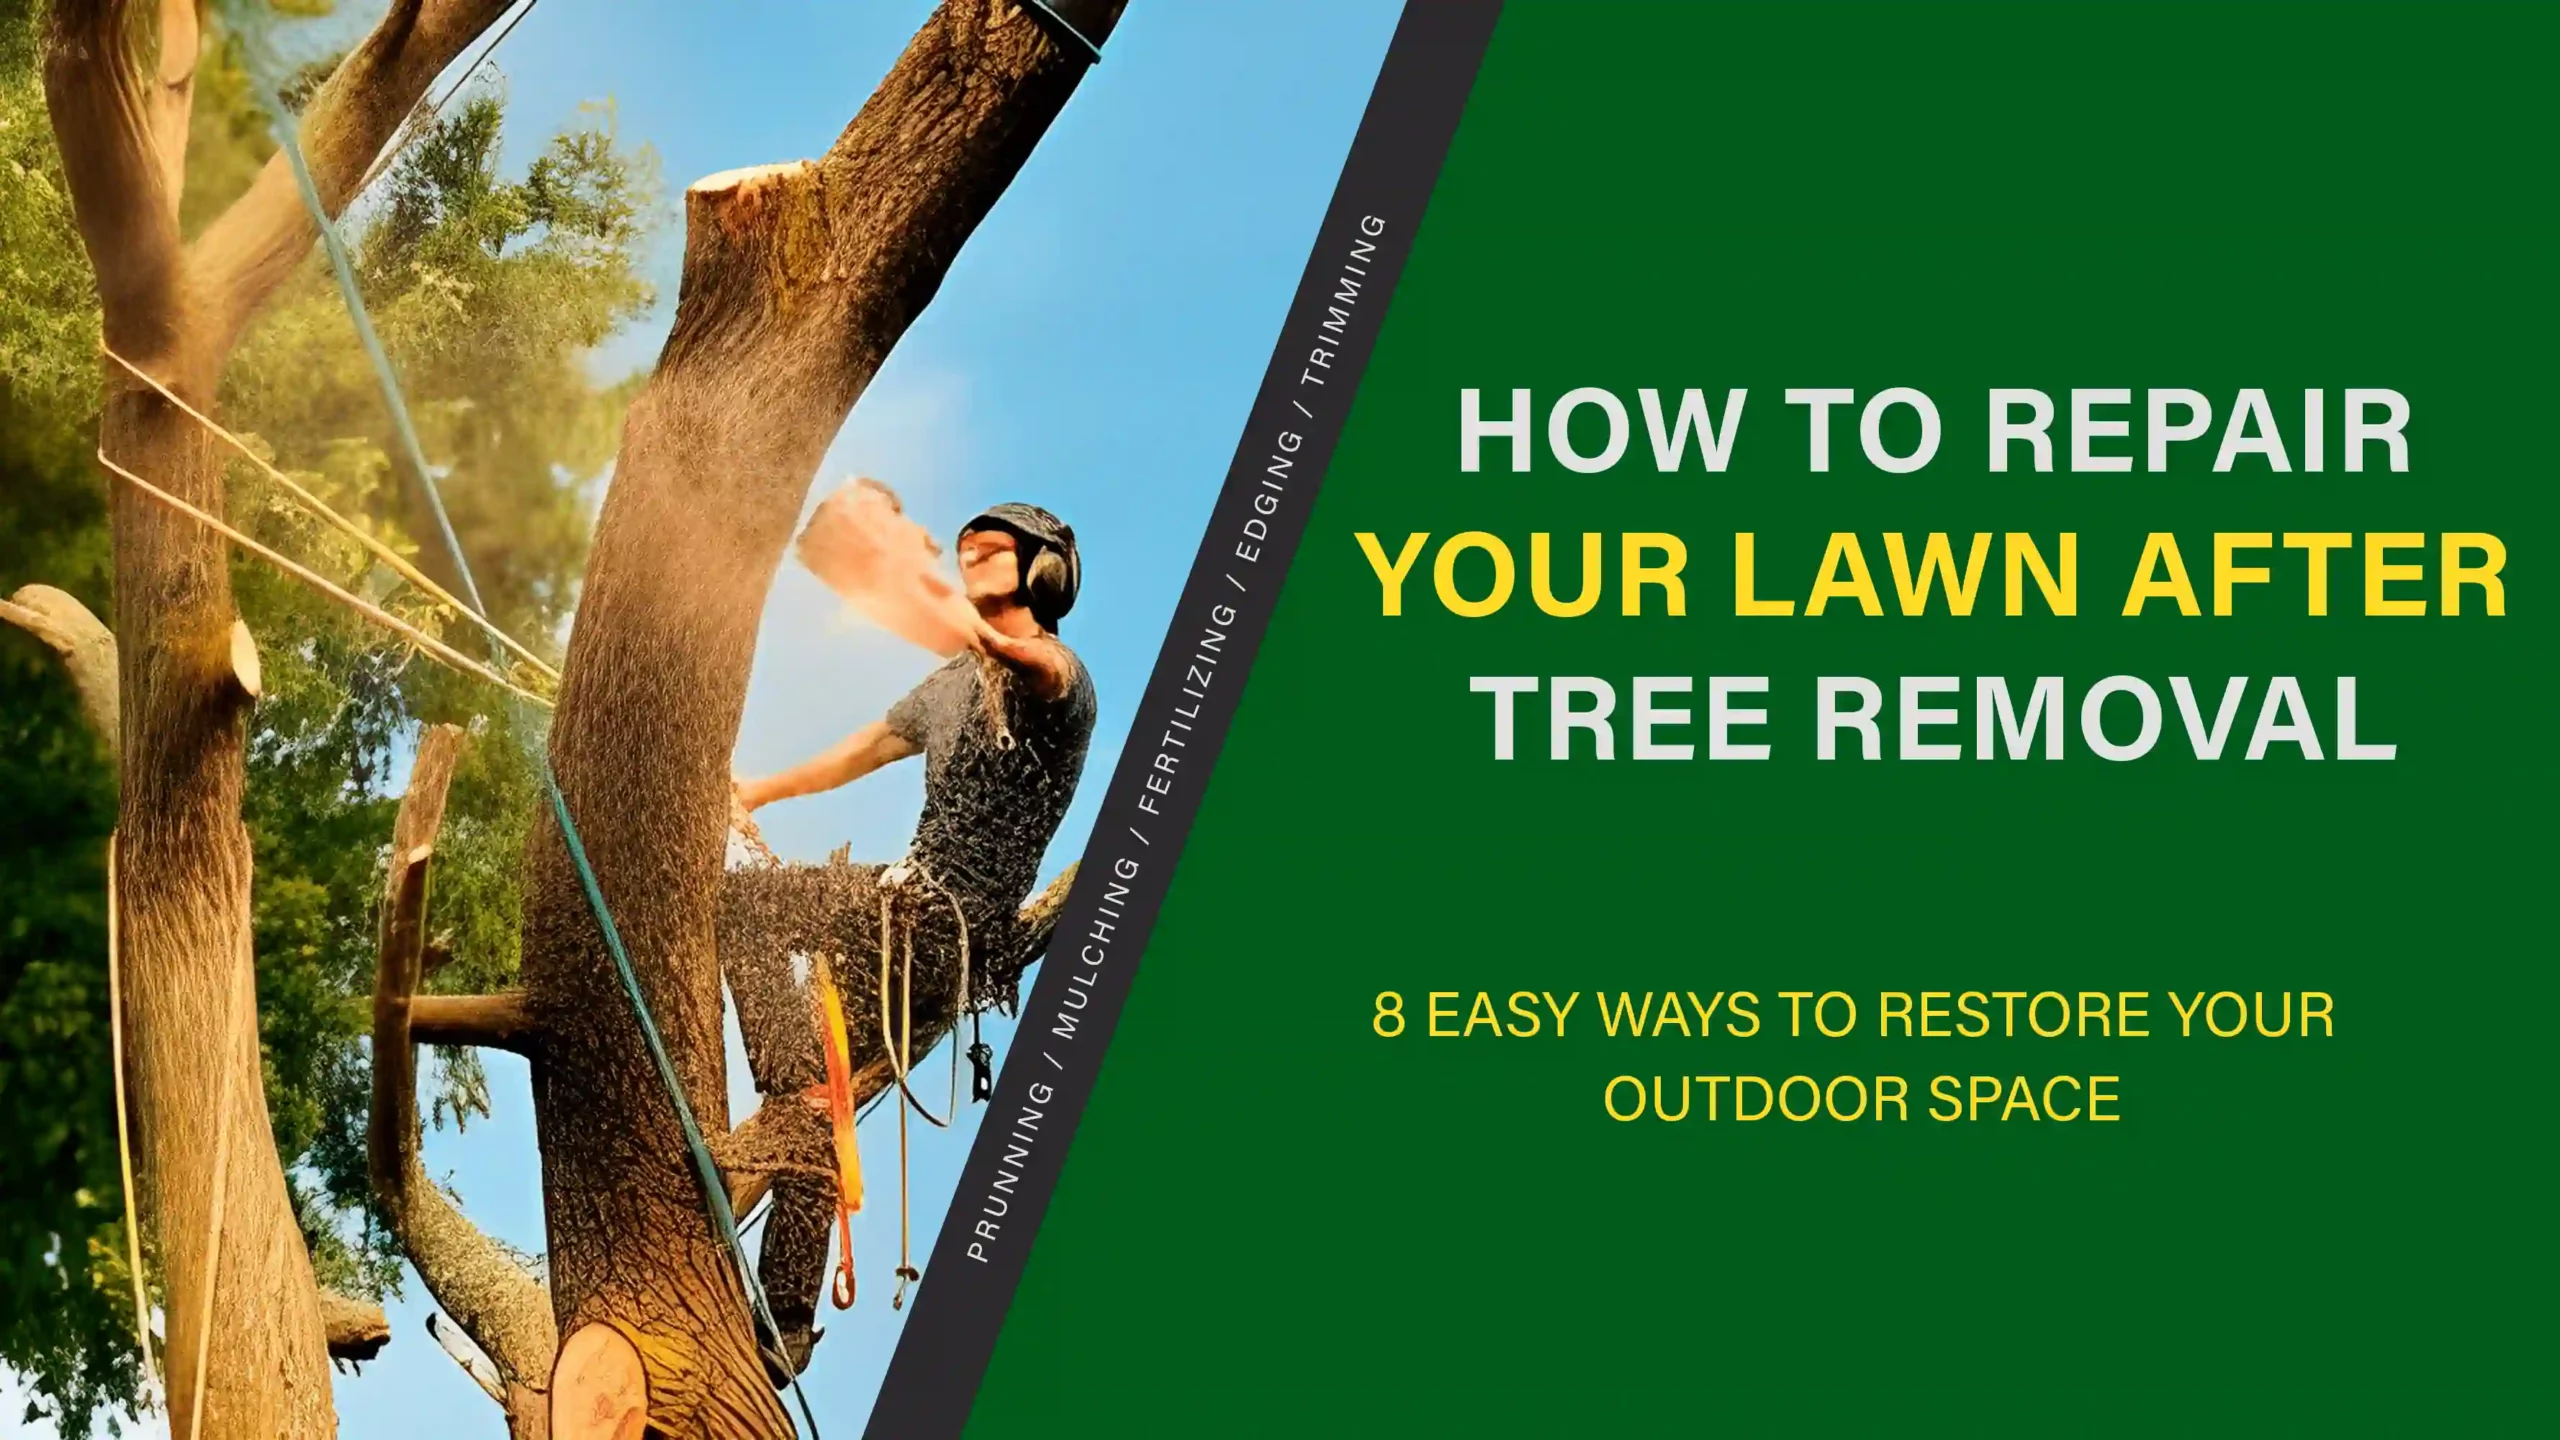 How to Repair Your Lawn After Tree Removal – 8 Easy Ways